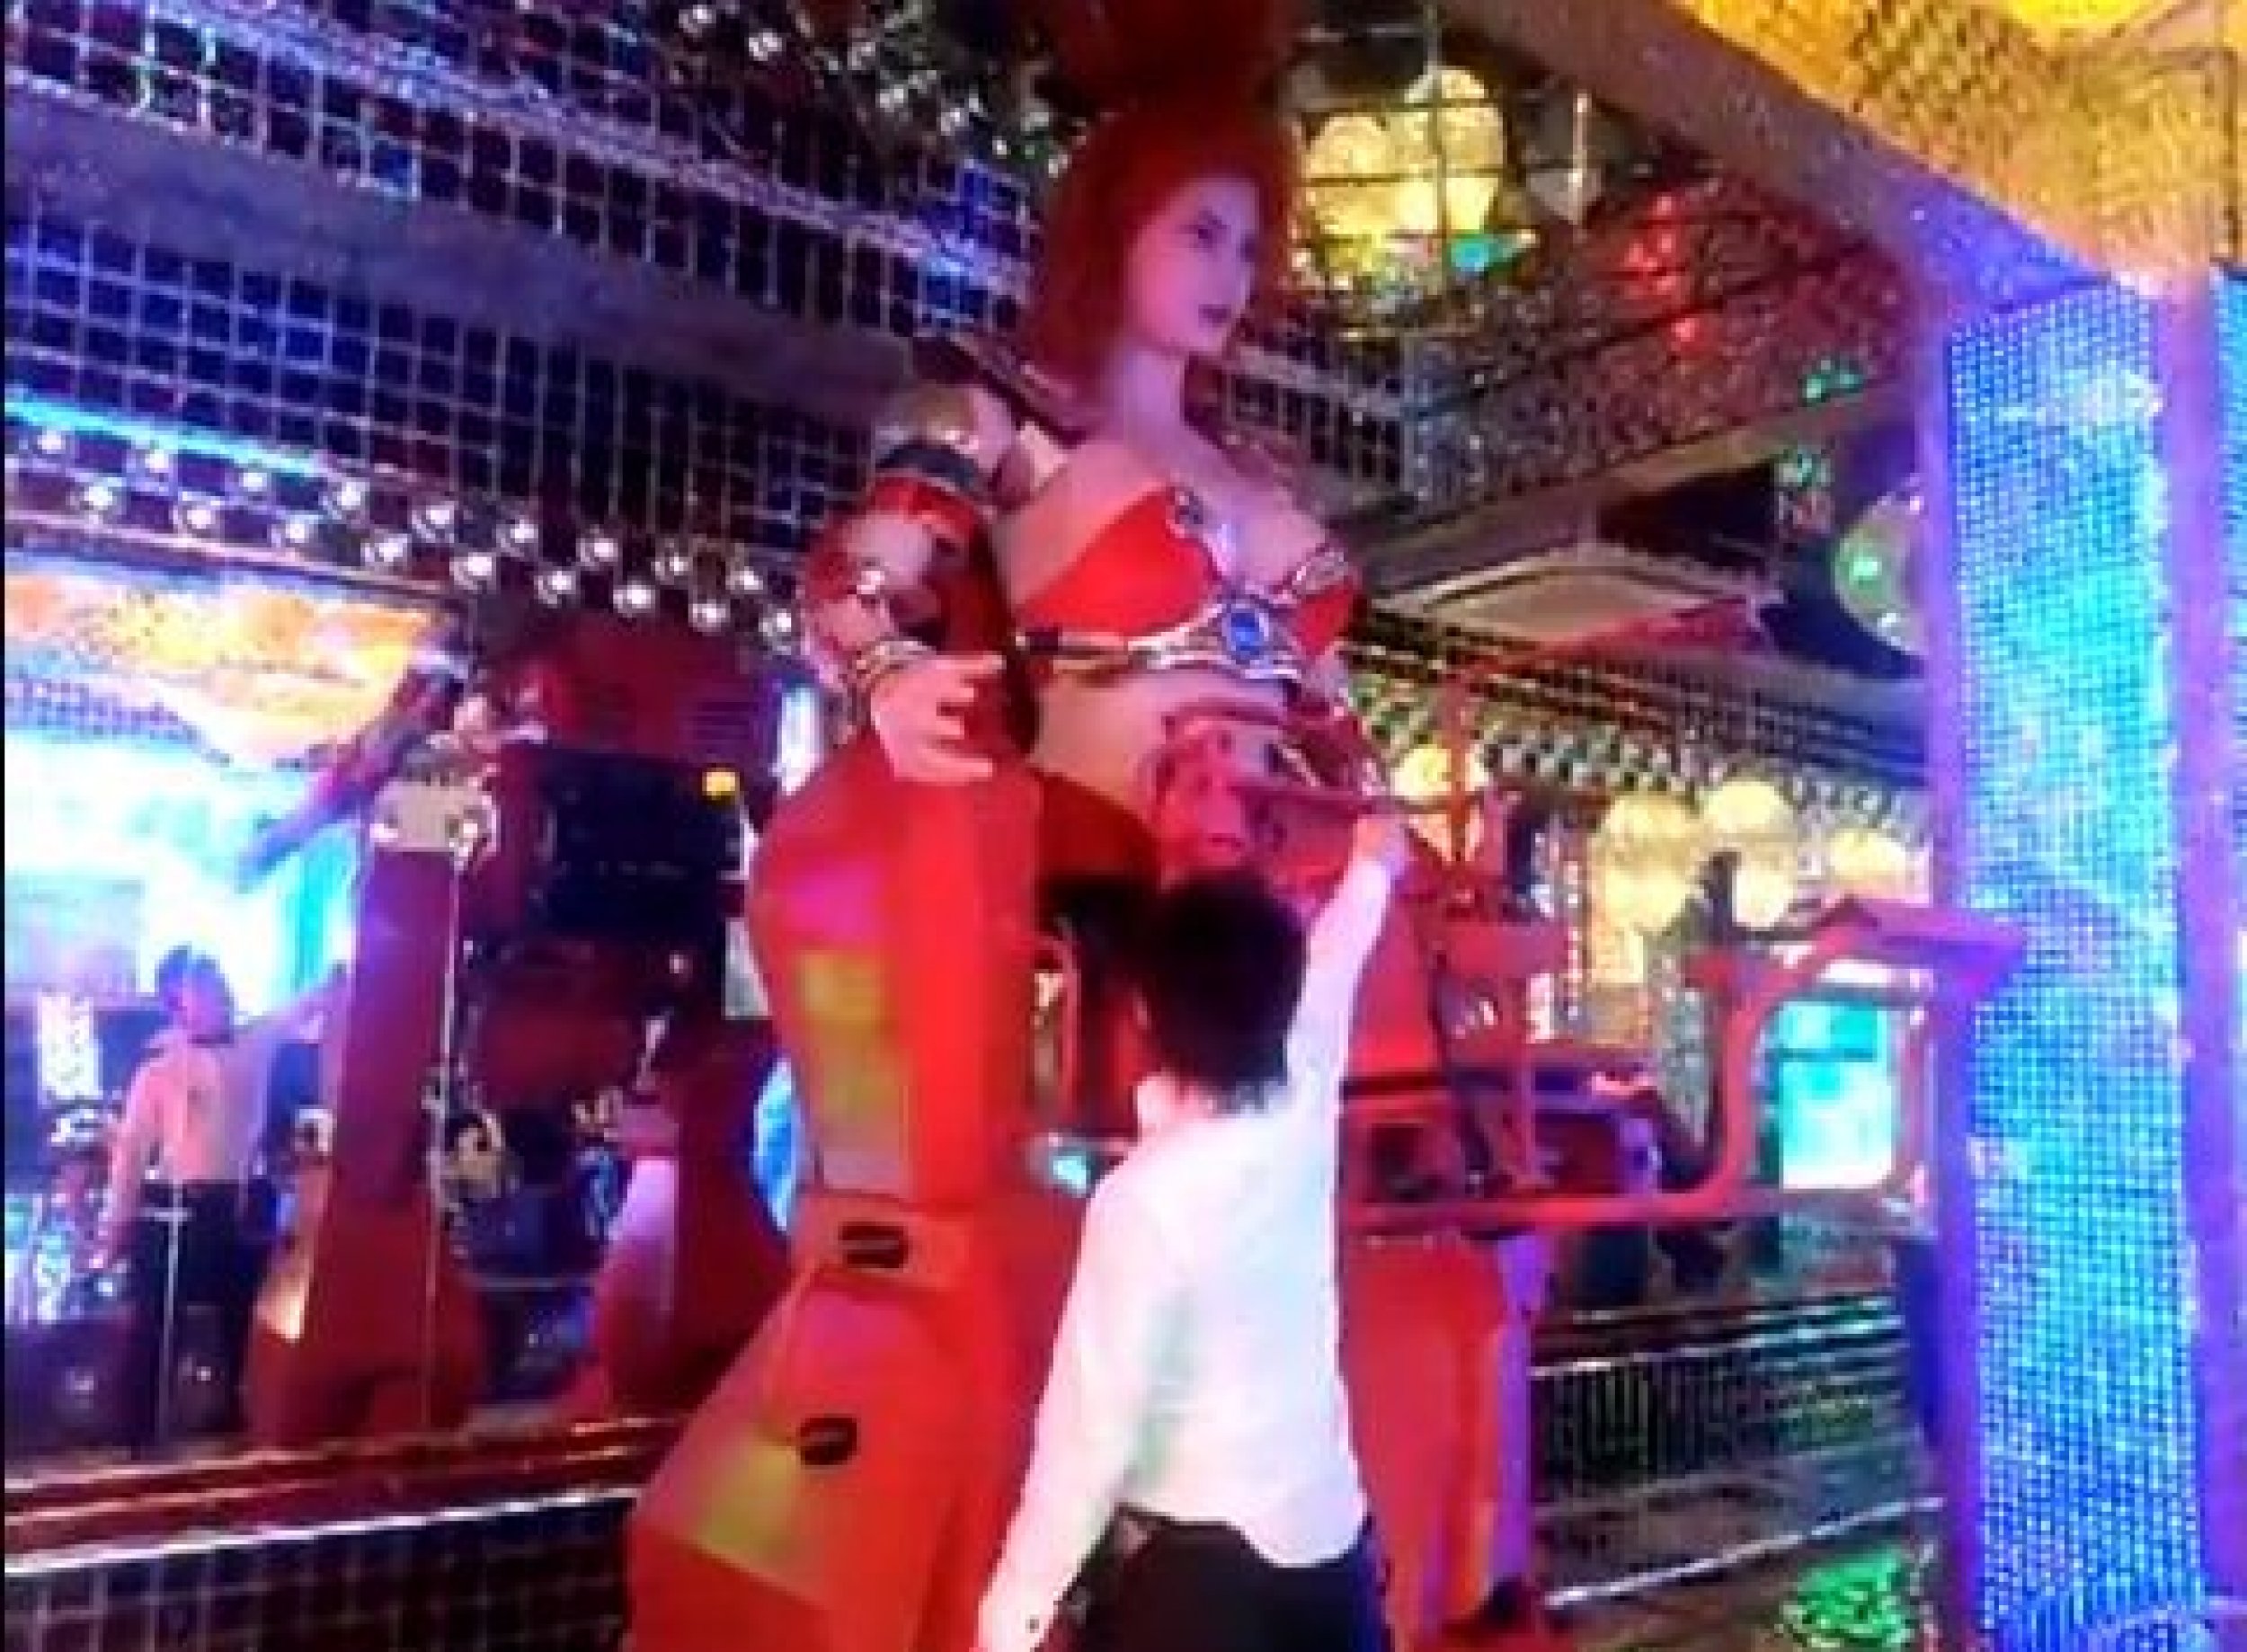 Women entertainers dance and provide adult entertainment to the customers 